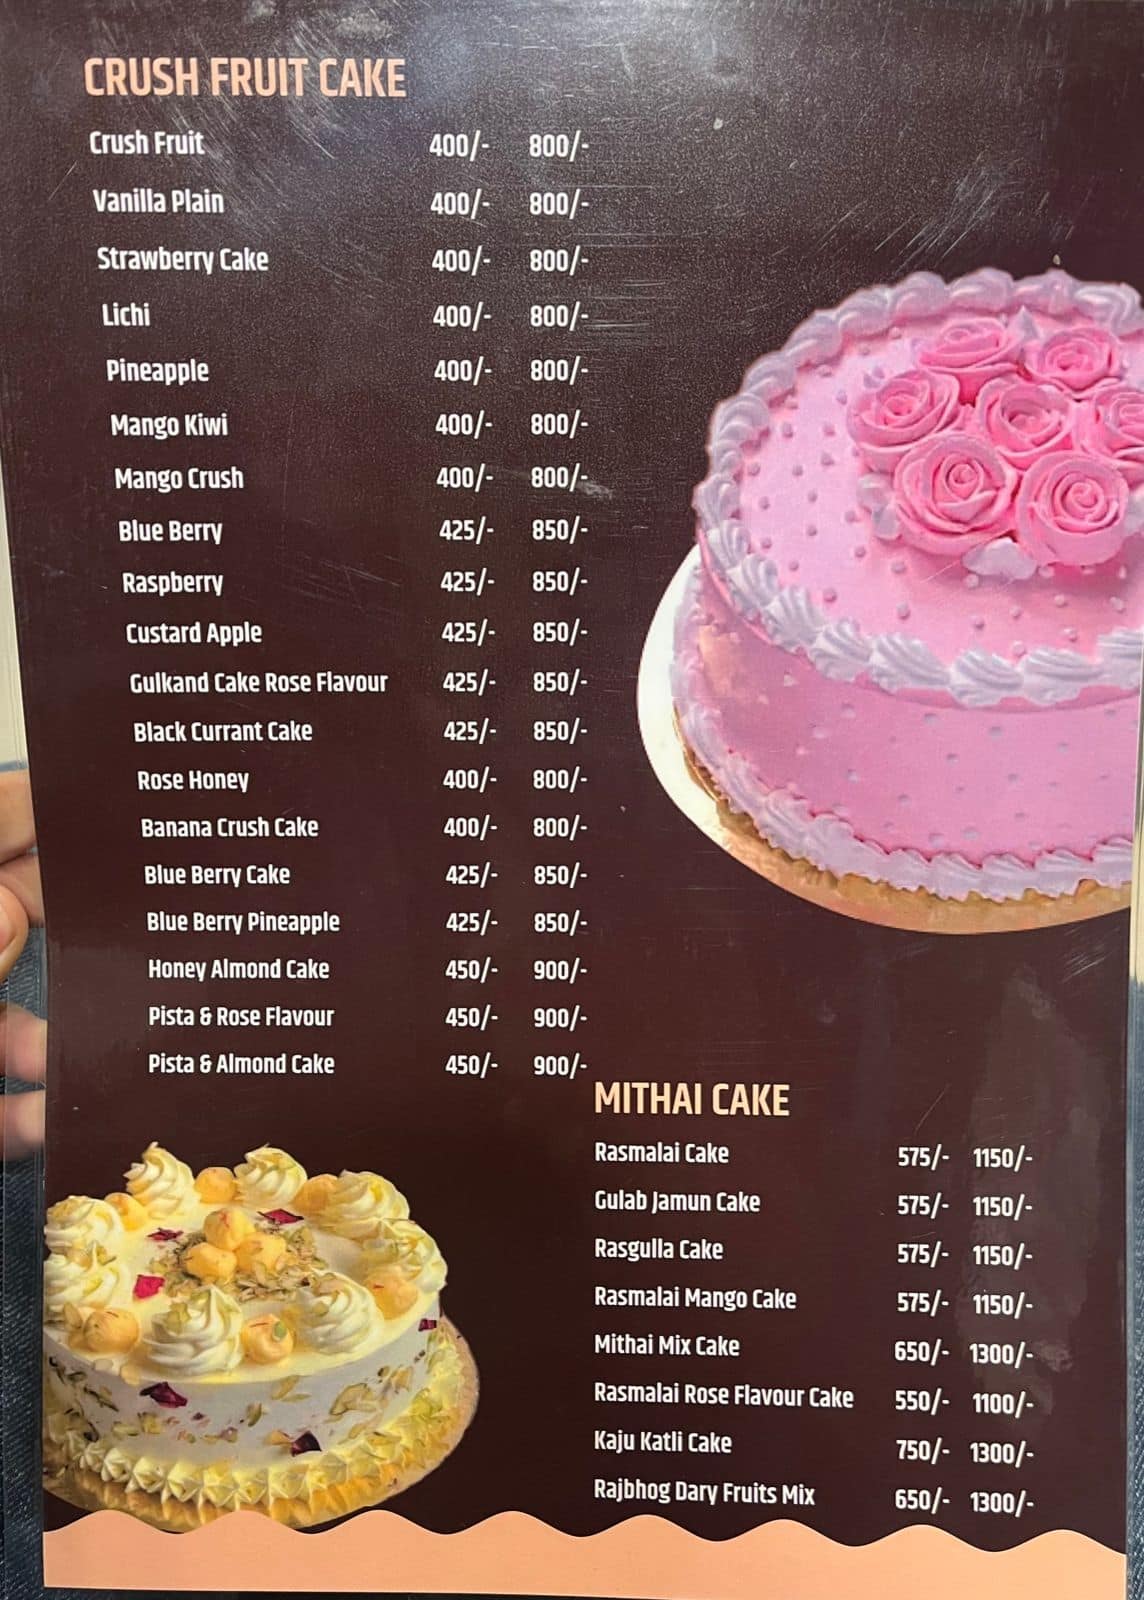 All Cakes | Cake World - Delicious Cakes for Every Occasion.